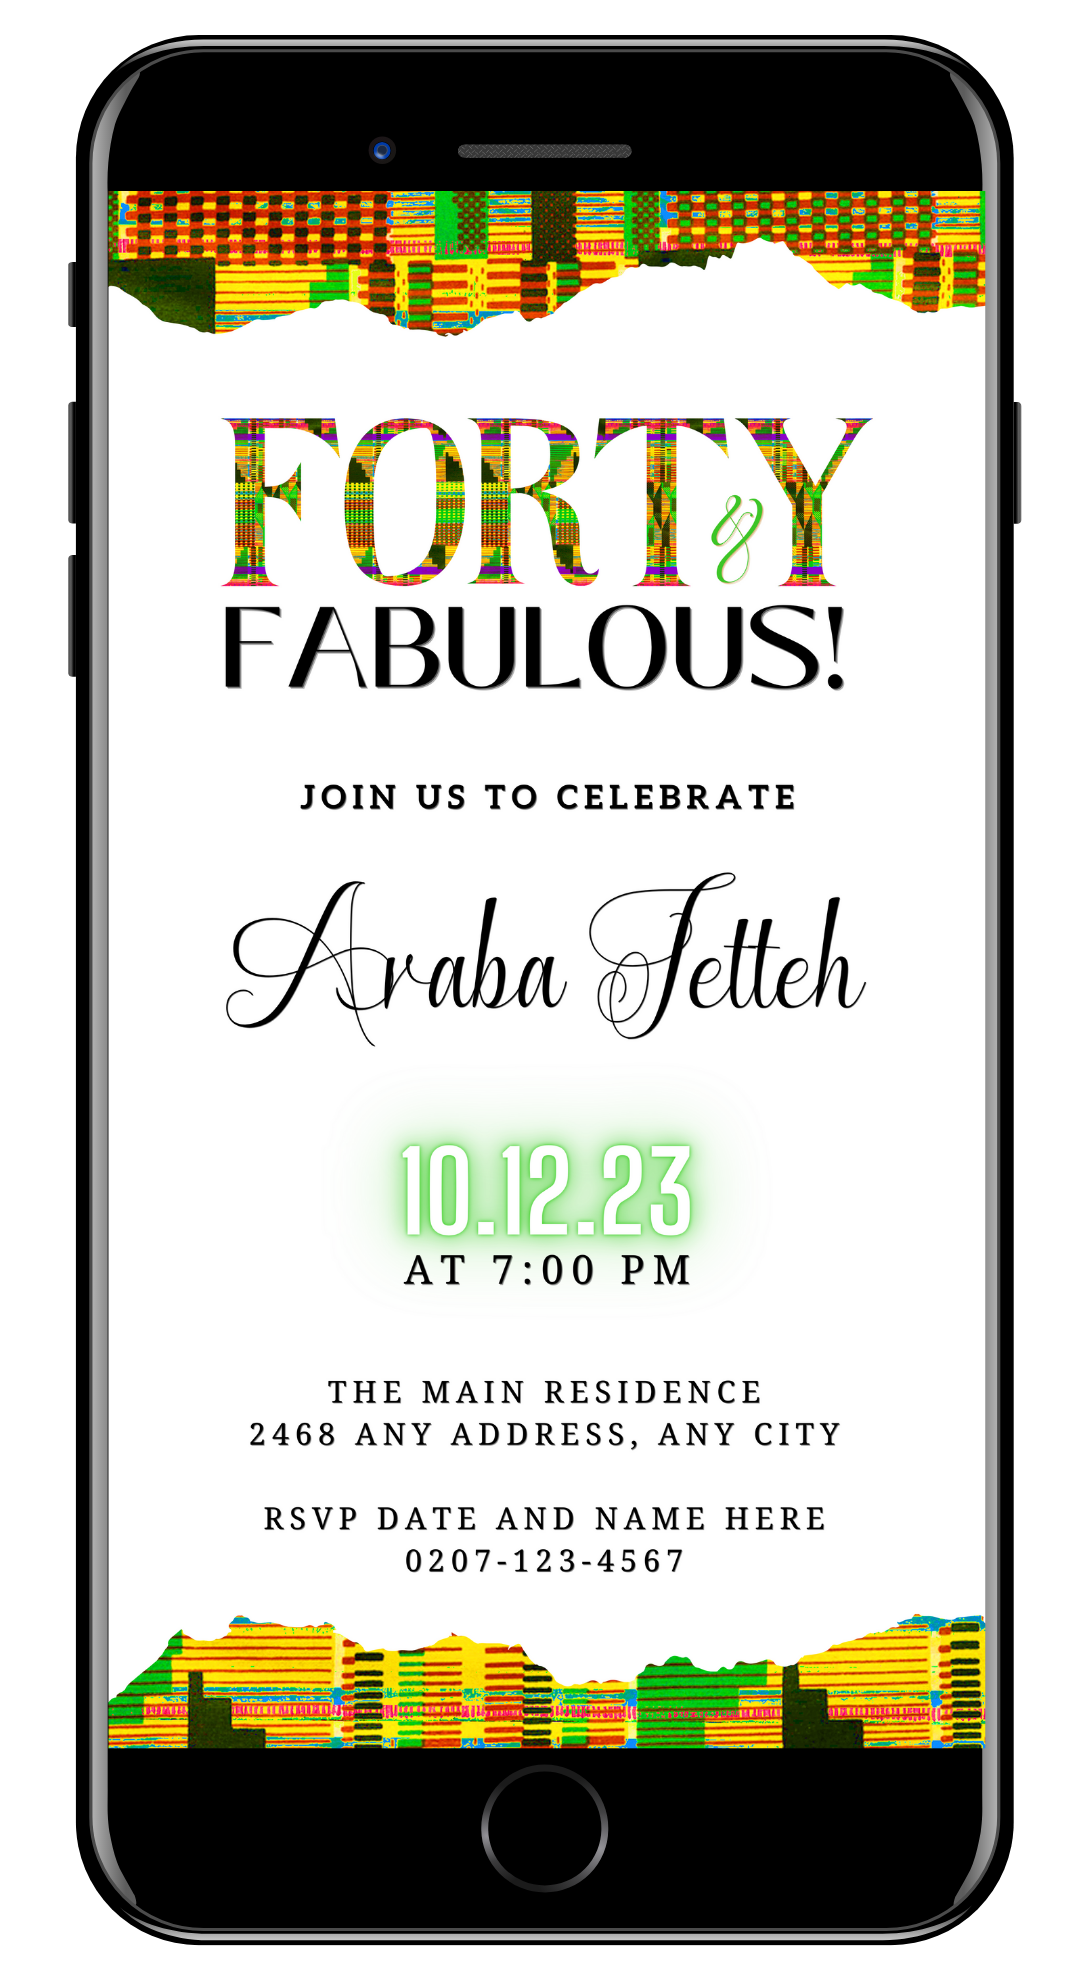 Digital invitation template displayed on a smartphone, titled Green Yellow Kente White | 40 & Fabulous Party Evite. Editable via Canva, featuring colorful text and customizable event details.